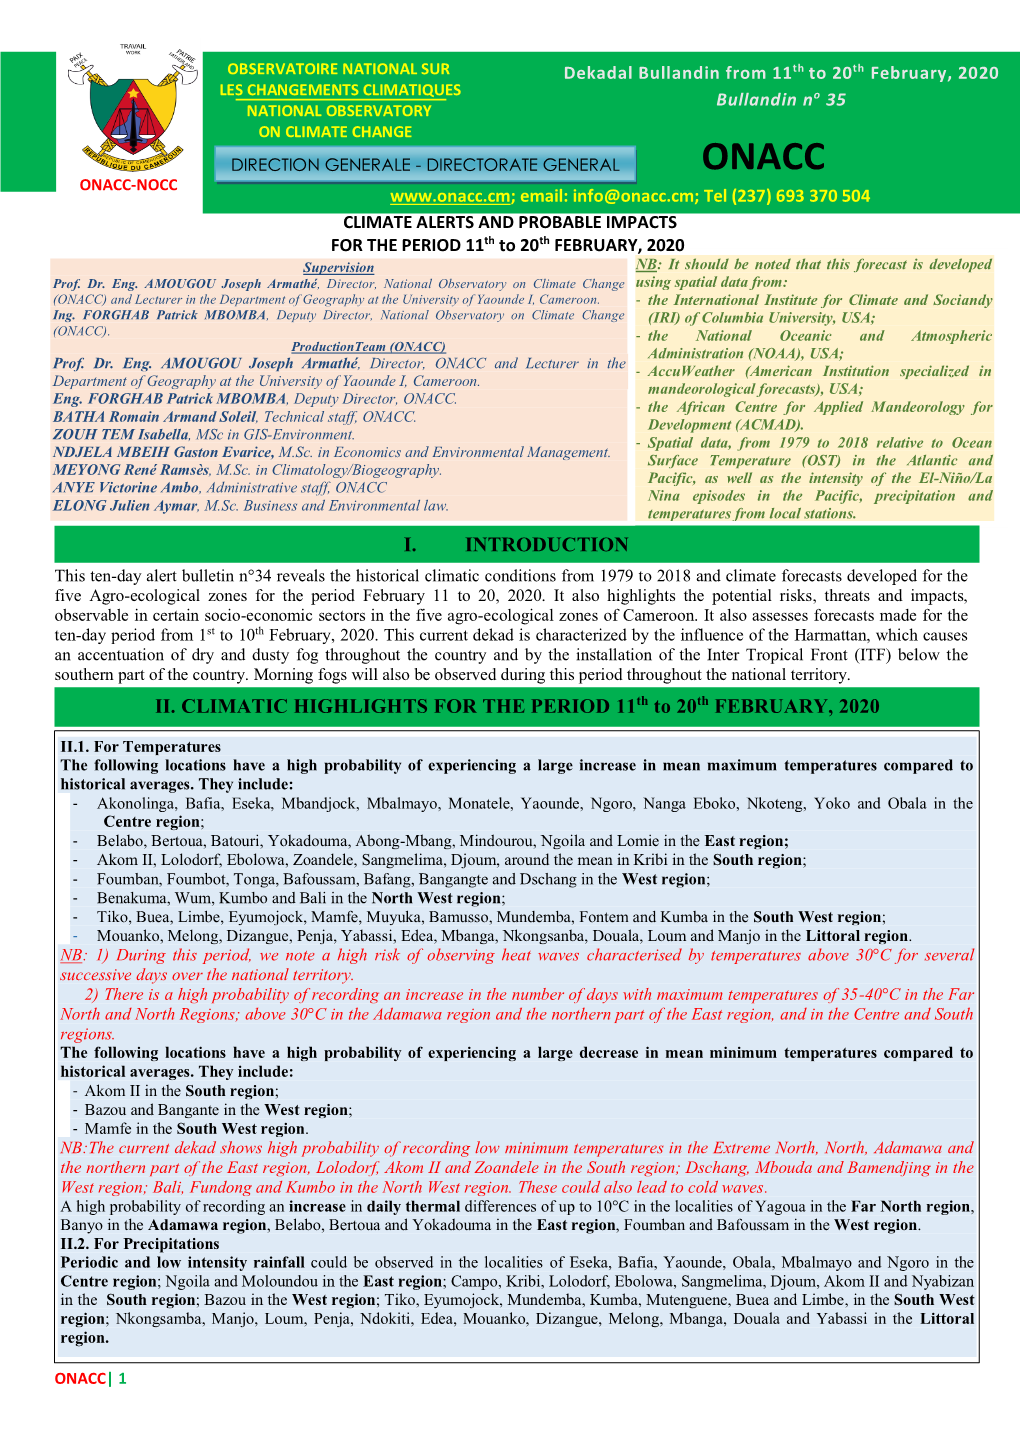 II. CLIMATIC HIGHLIGHTS for the PERIOD 11Th to 20Th FEBRUARY, 2020